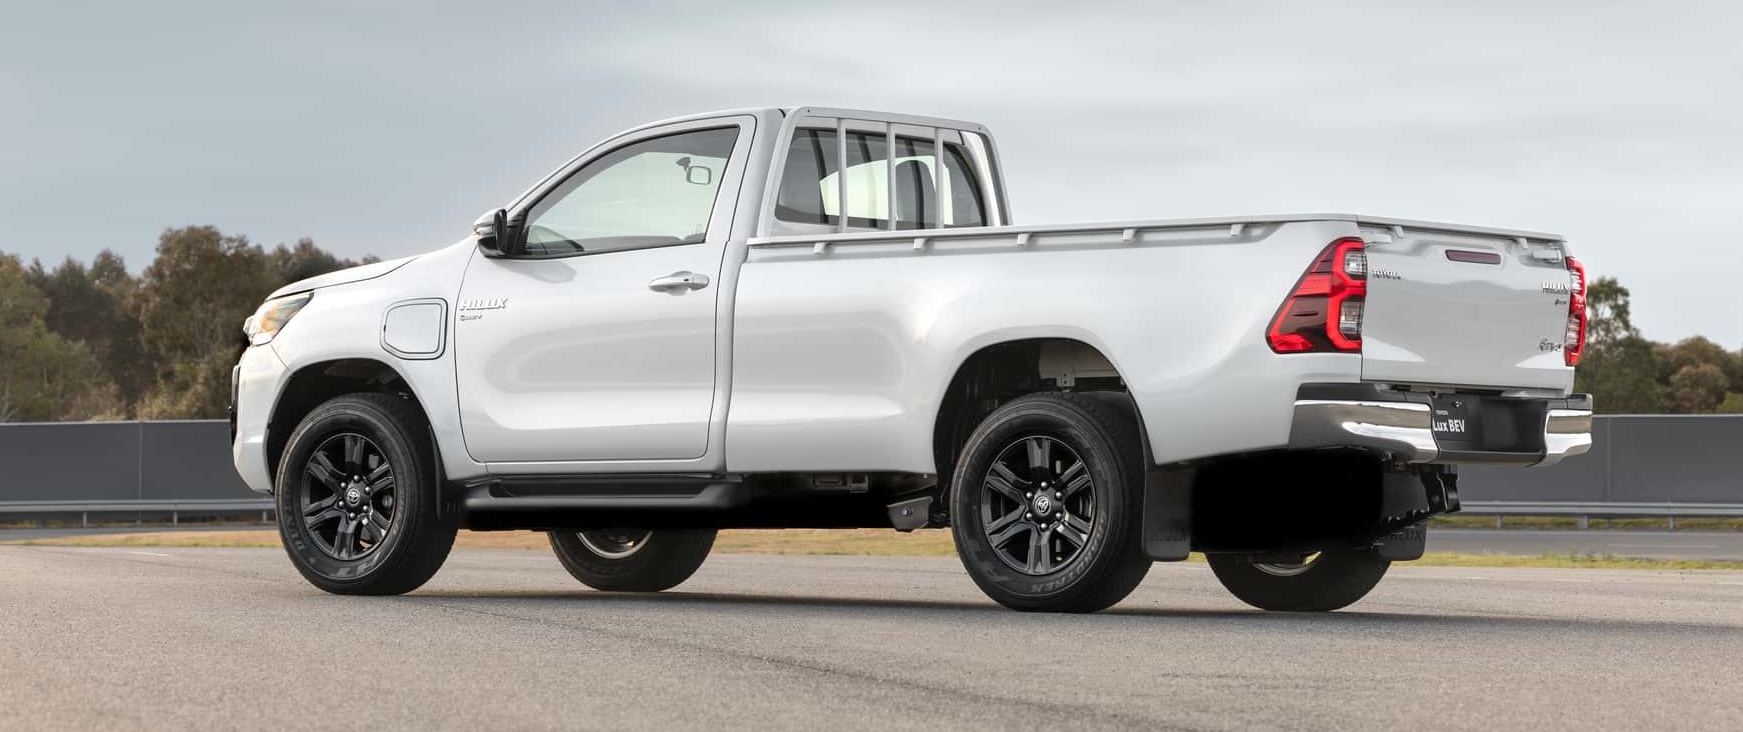 Toyota to Trial All-Electric Pickup Truck in Thailand to Meet Growing Demand